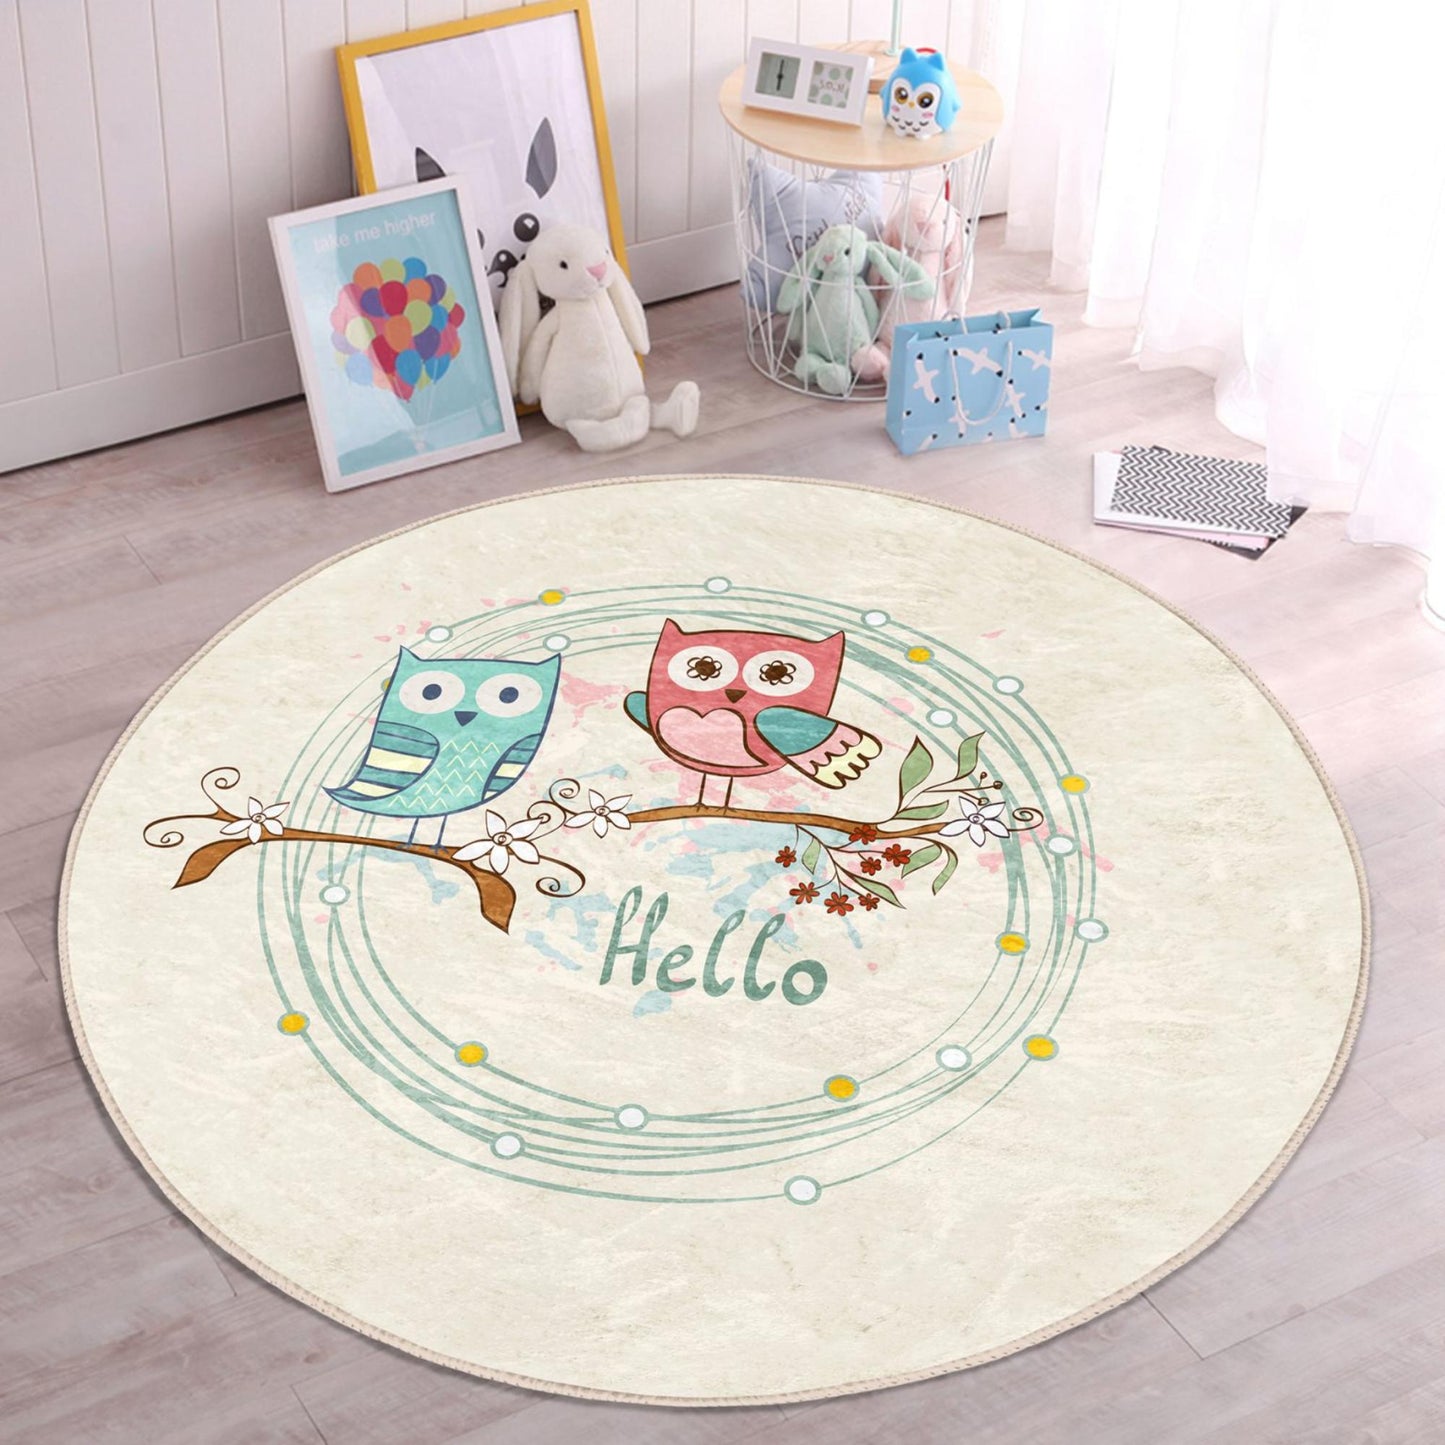 Kids rug featuring owls on the tree for a whimsical touch.